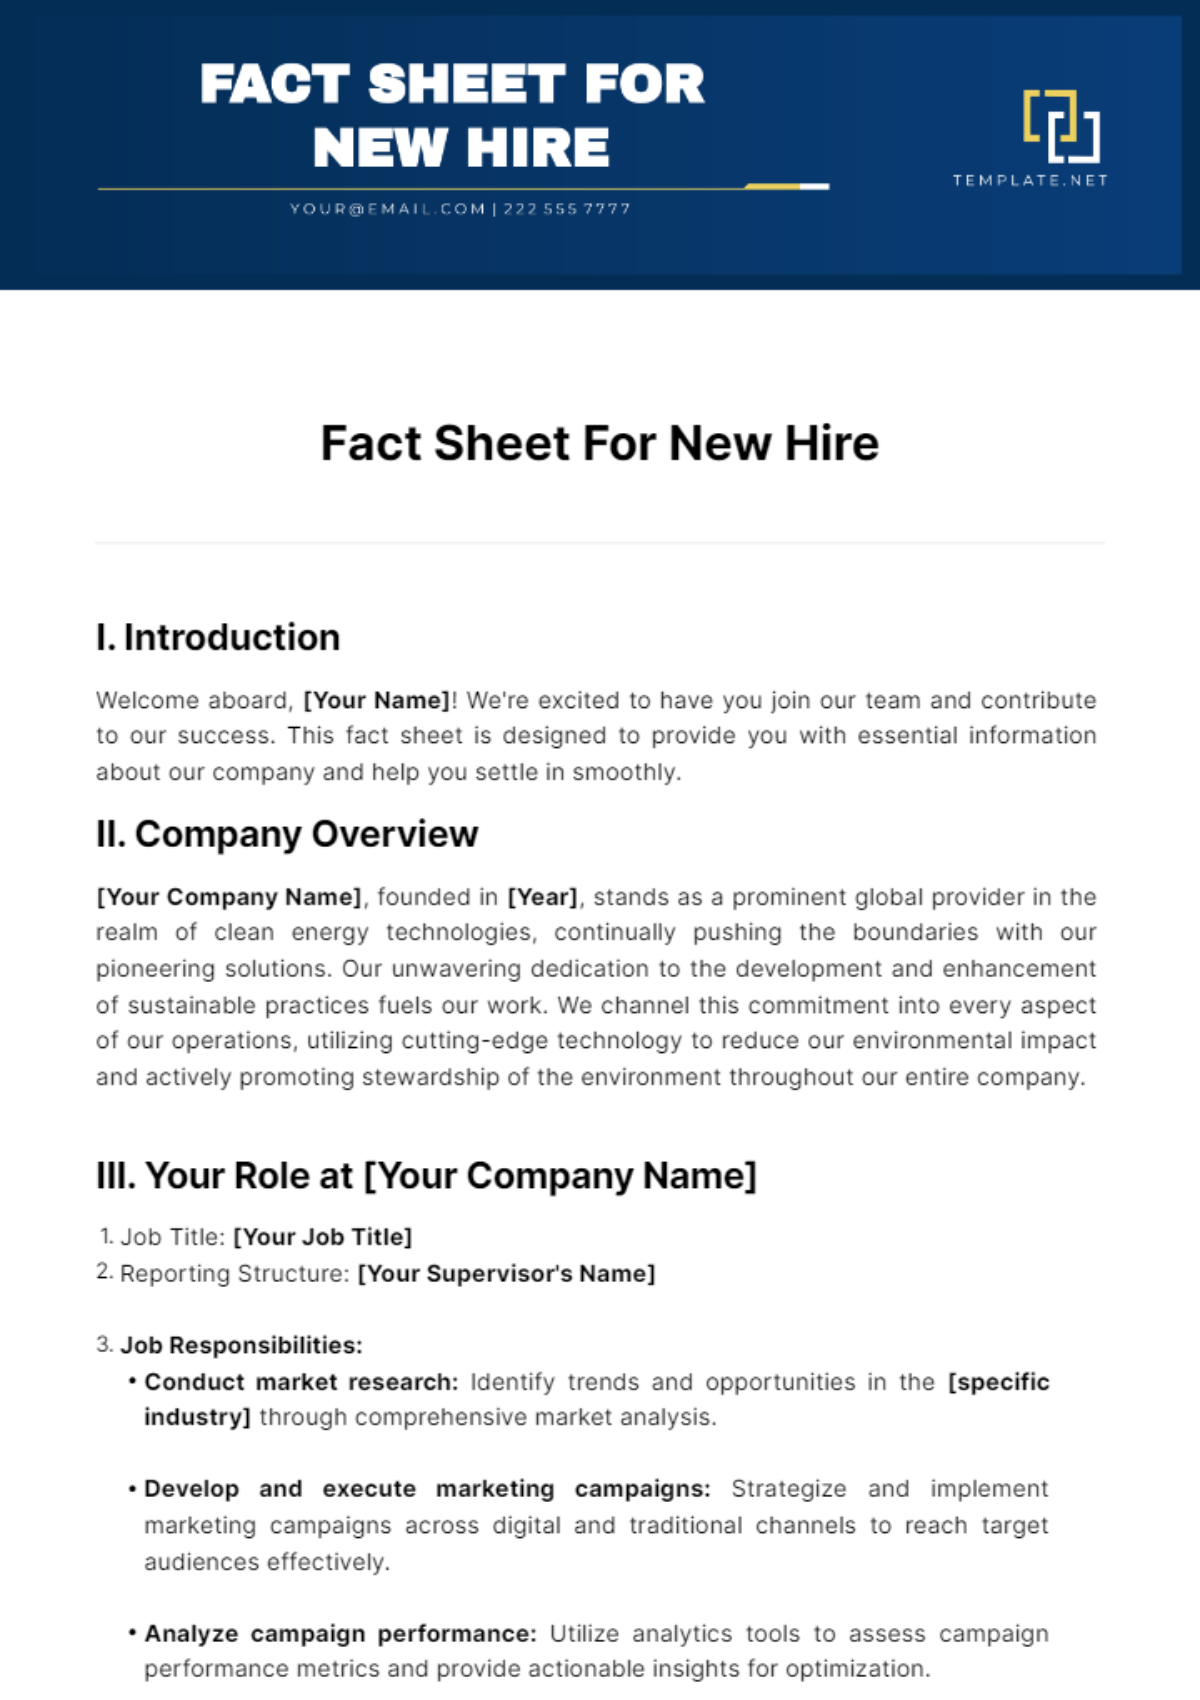 Free Fact Sheet For New Hire Template